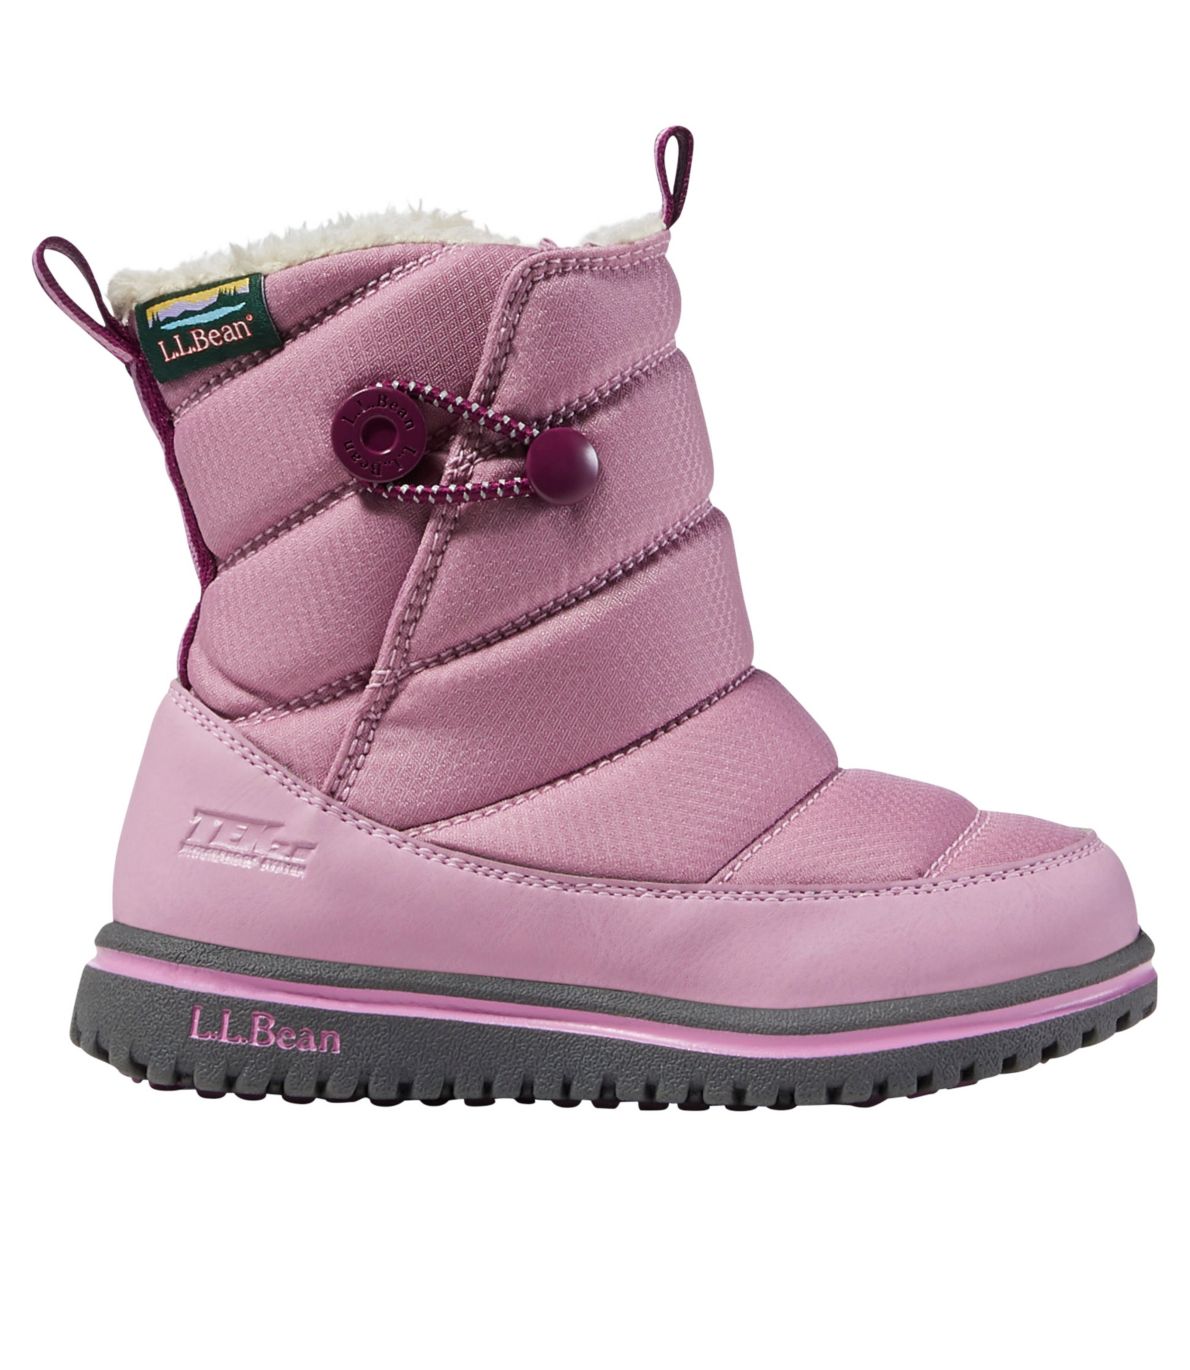 Toddlers' Ultralight Winter Boots